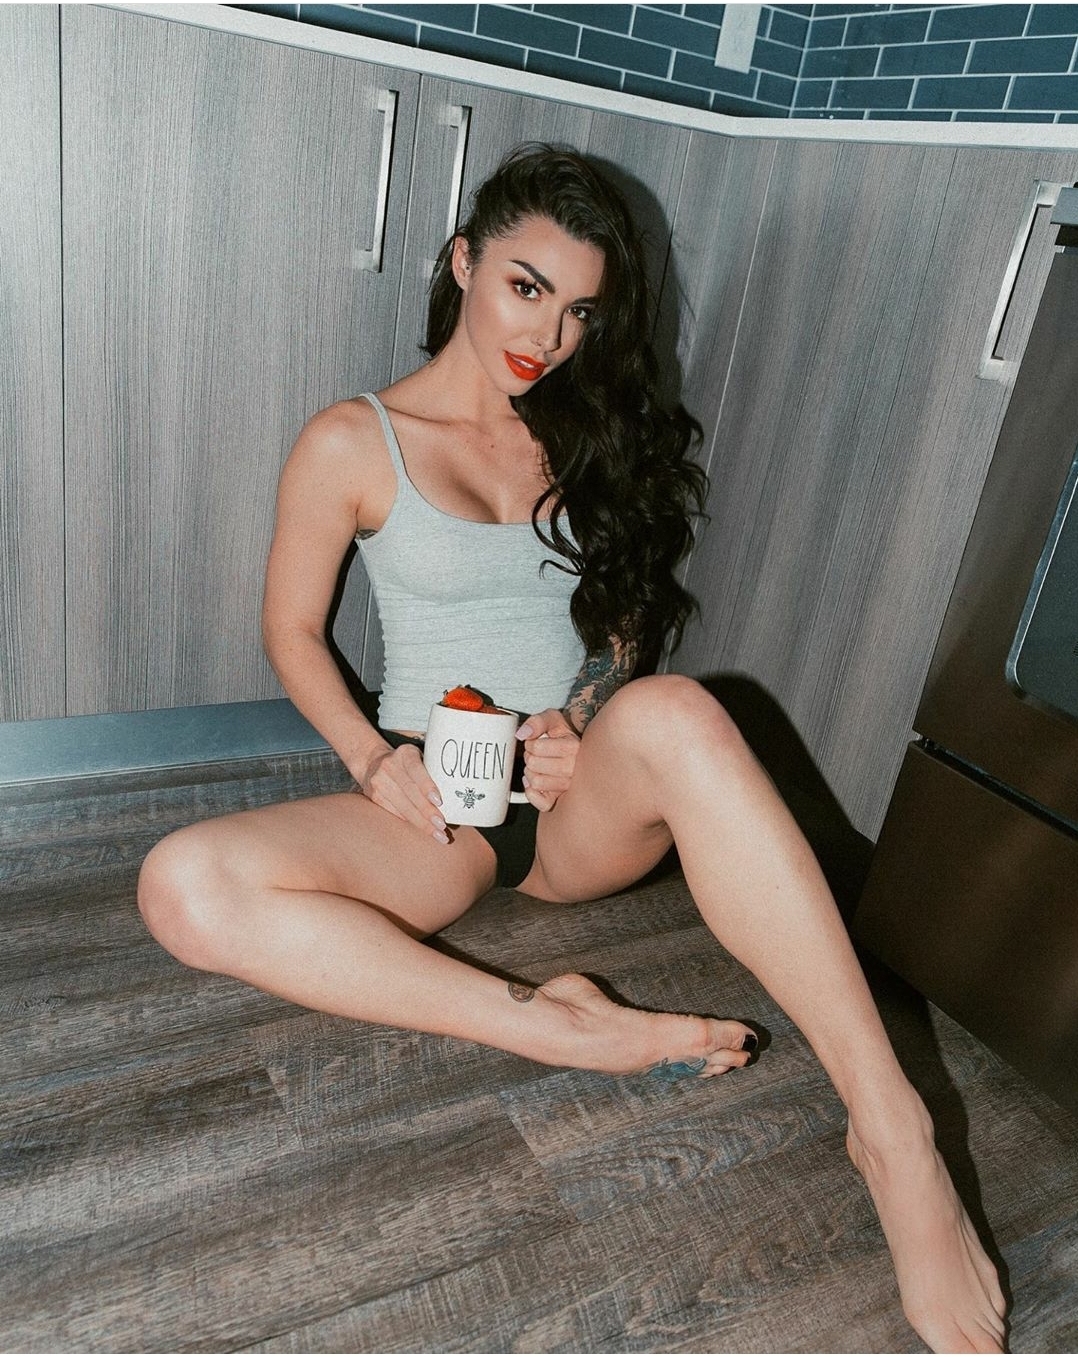 Kailah casillas only fans. 